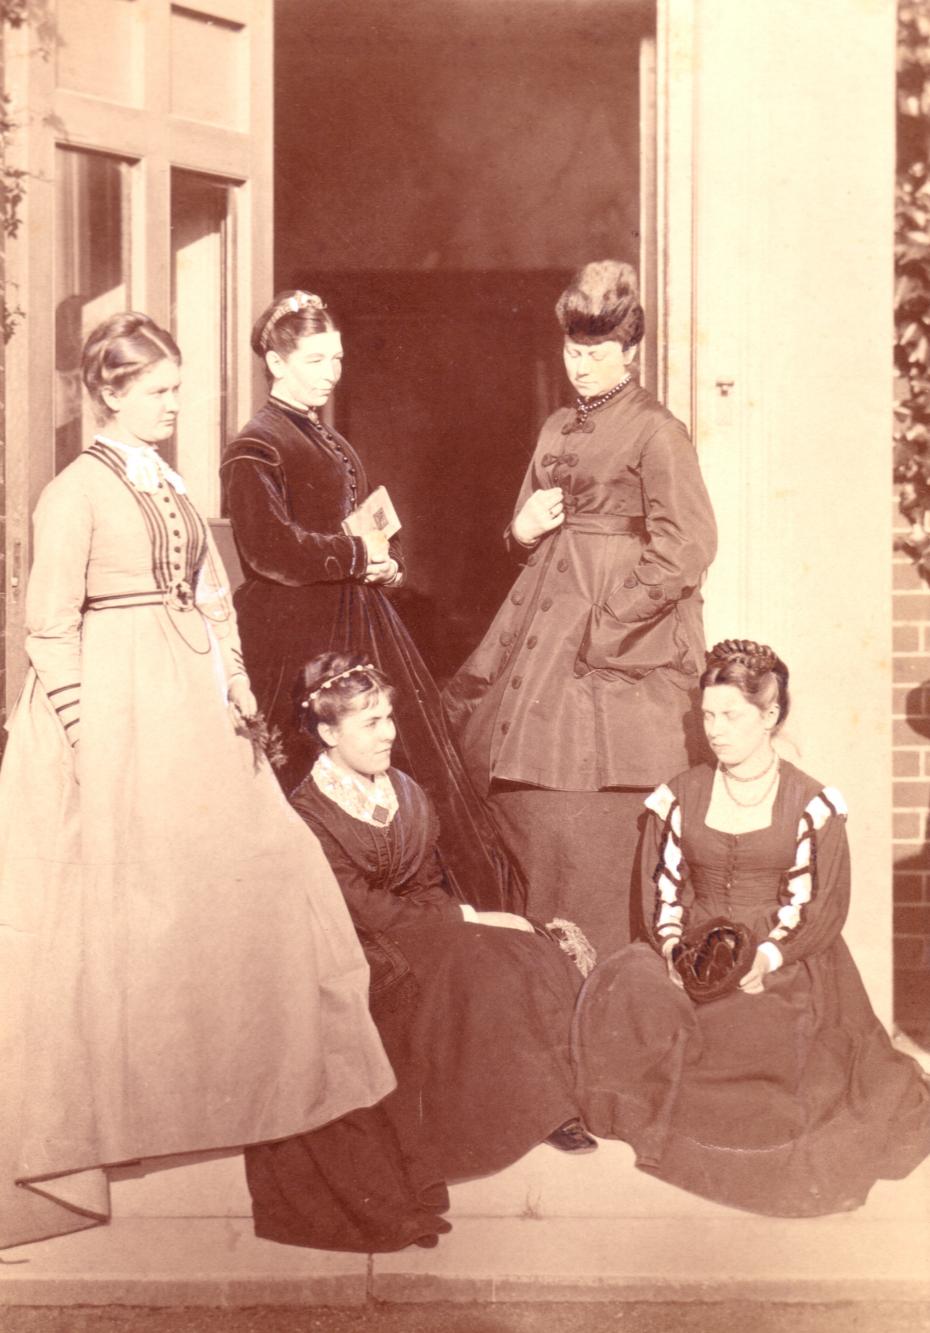 Caption: Photograph of the first five students at Hitchin, 1869. (Back Row, L to R): Sarah Woodhead; Anna Lloyd; Louisa Lumsden. (Seated, L to R): Emily Caroline Gibson; Isabella Townshend (archive reference: GCPH 7/2/1/2a).